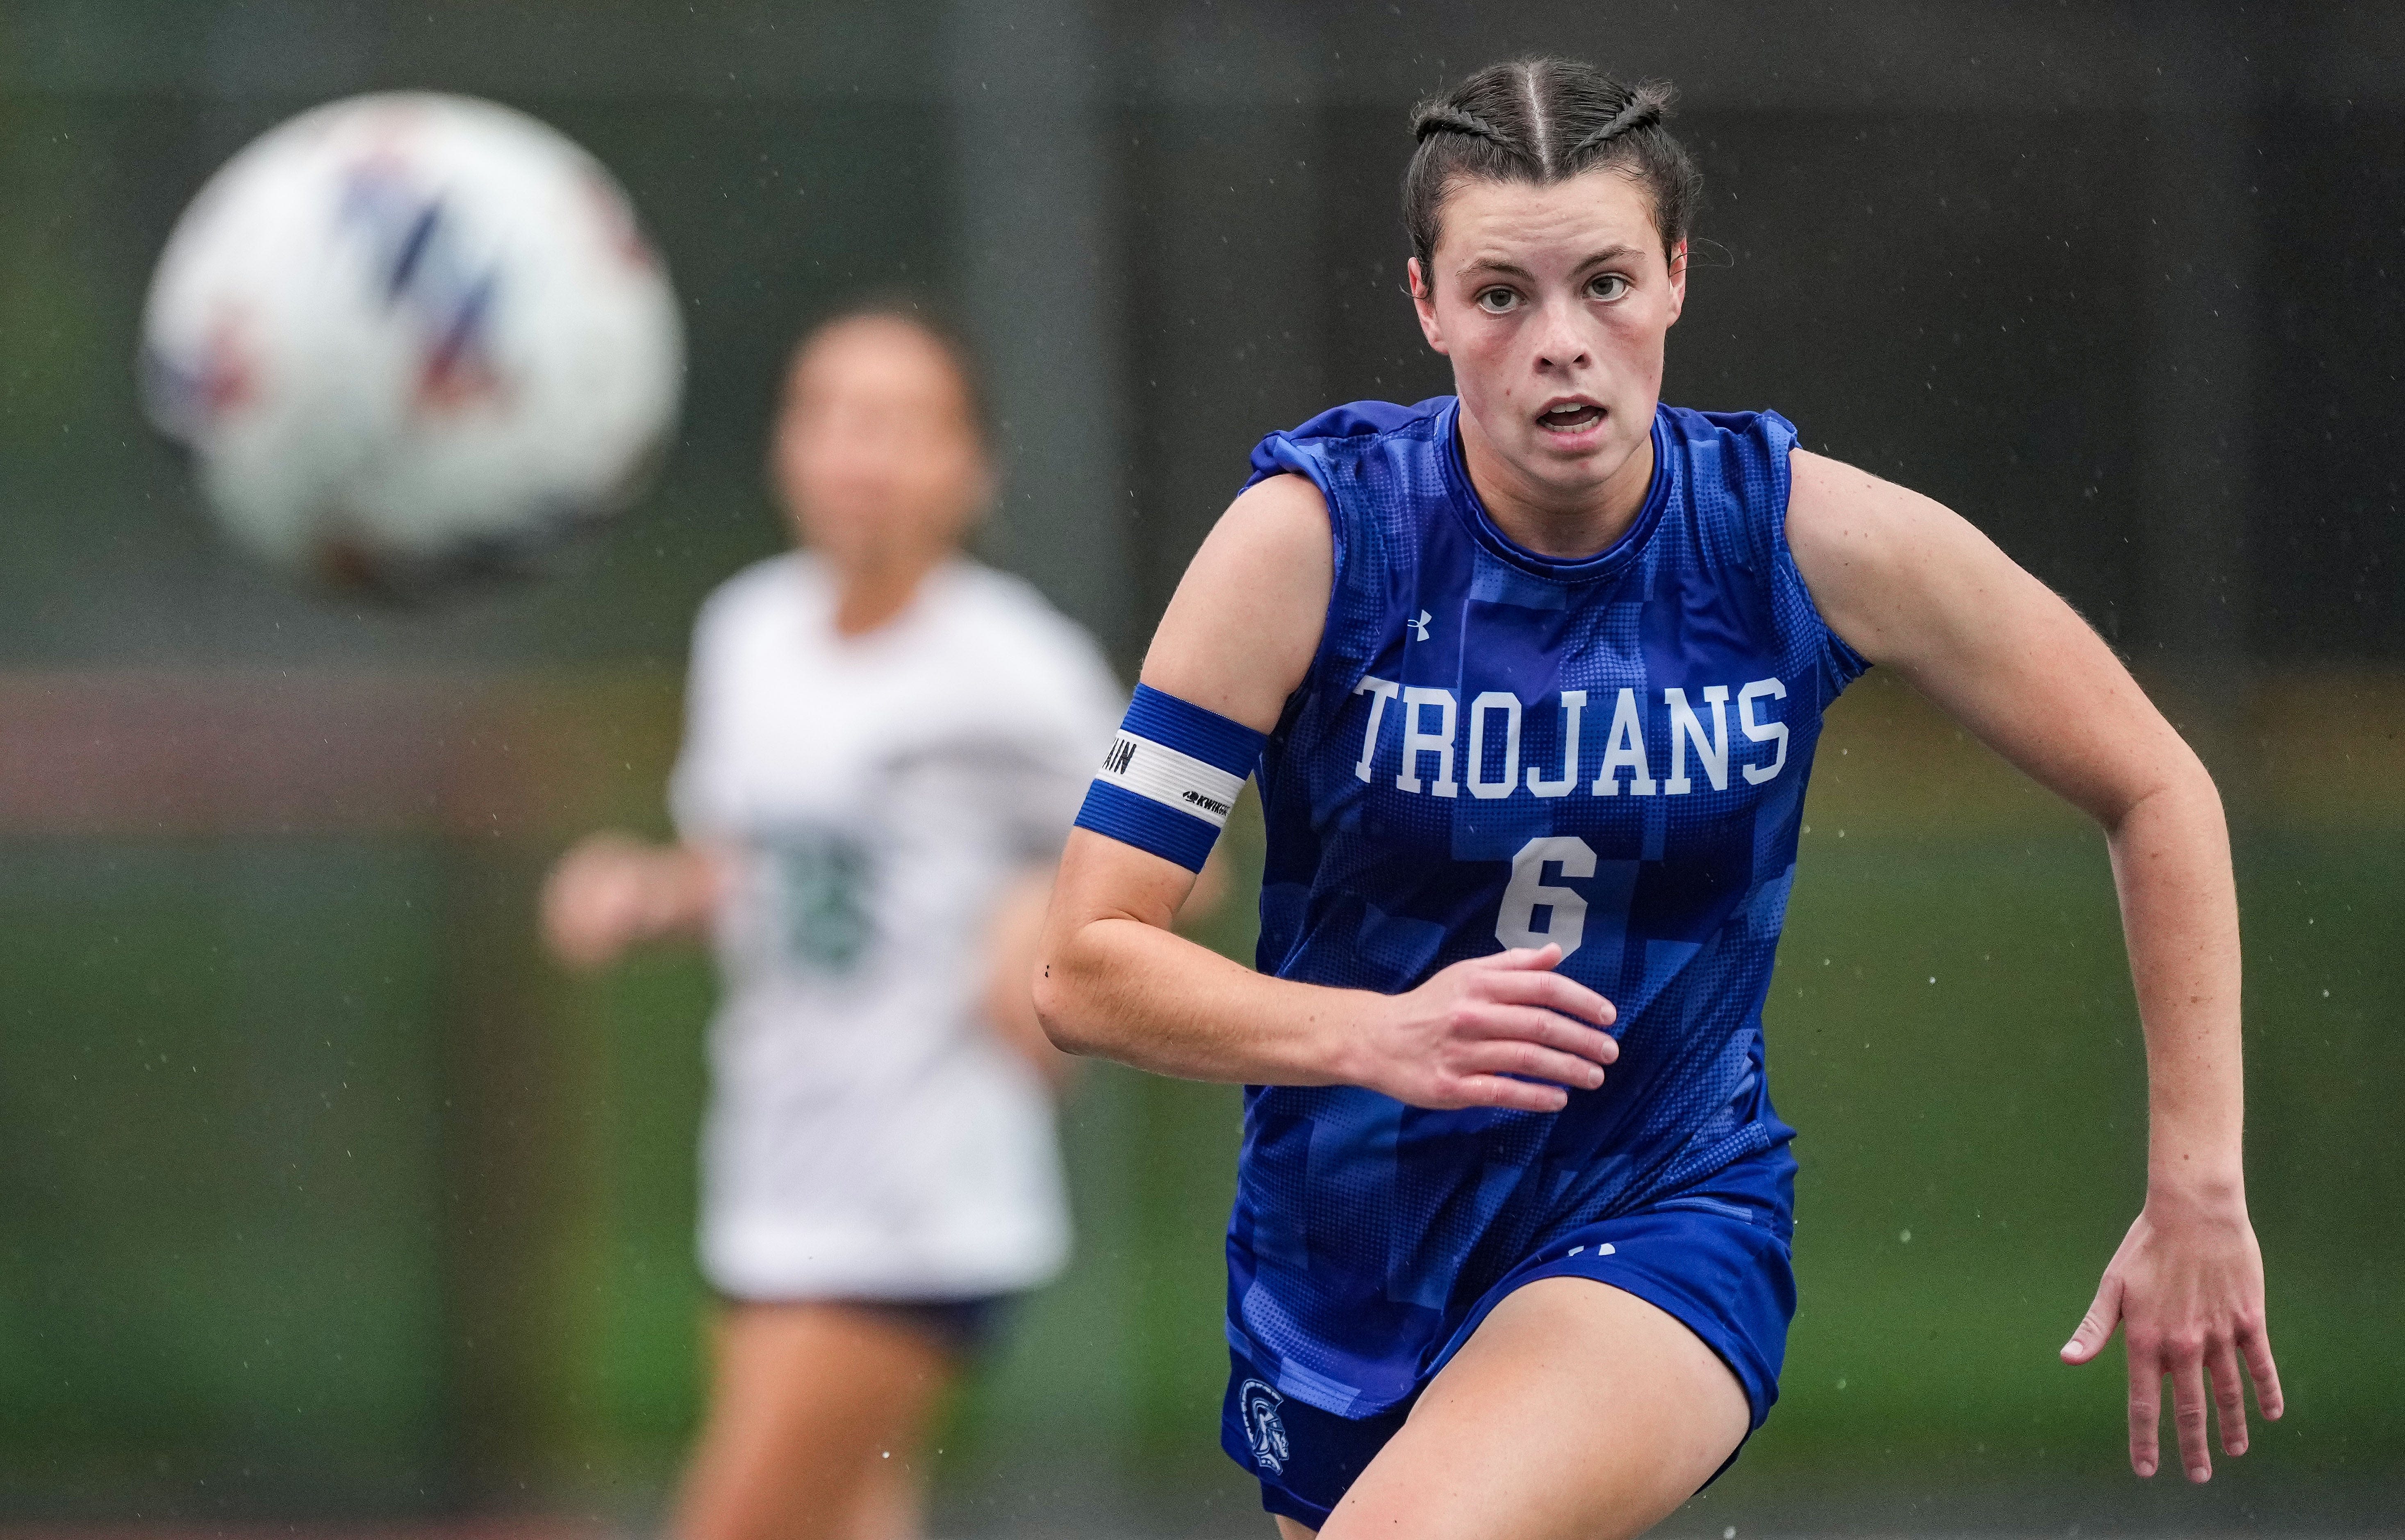 'I love competing.' Bishop Chatard's Addison Duncan City Female Athlete of the Year